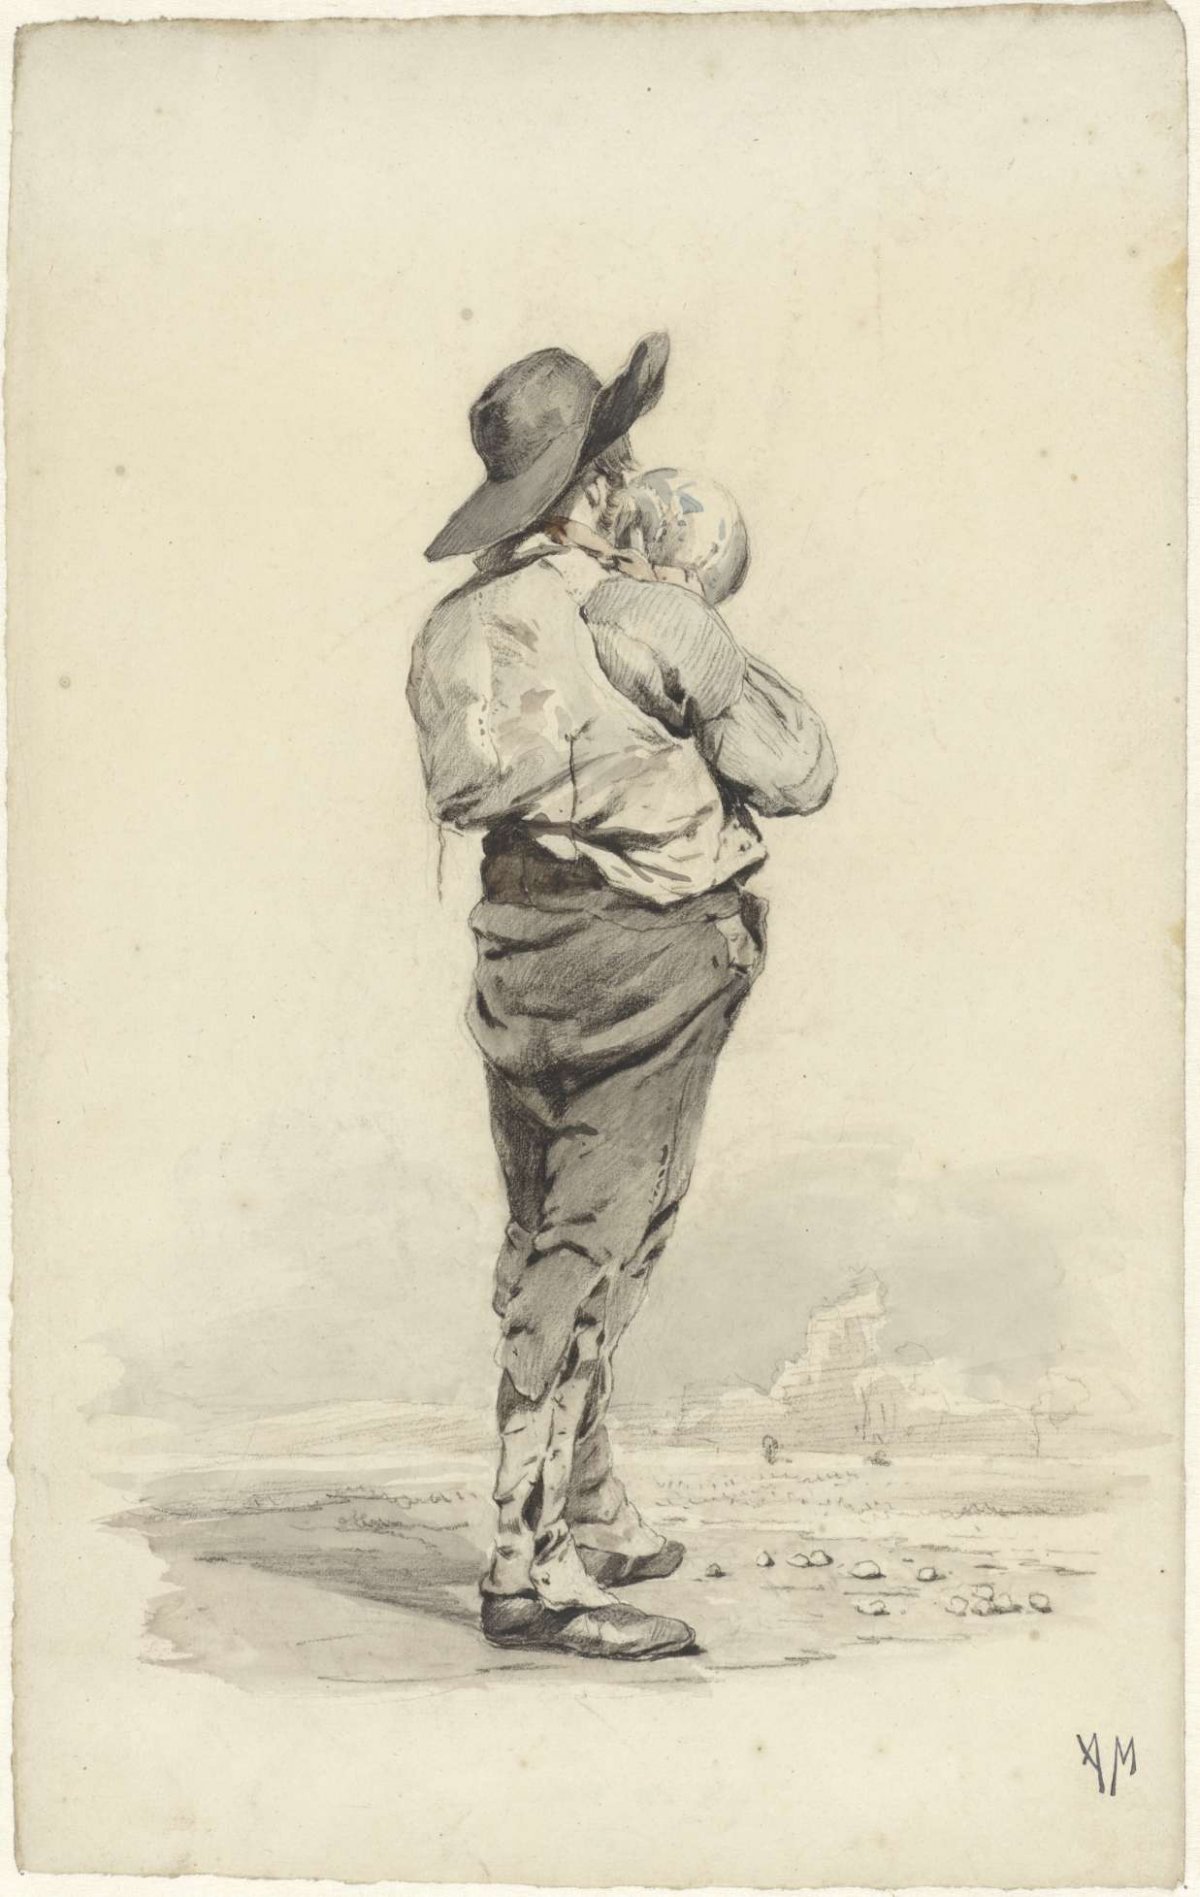 Standing man drinking from a pitcher, Anton Mauve, 1848 - 1888